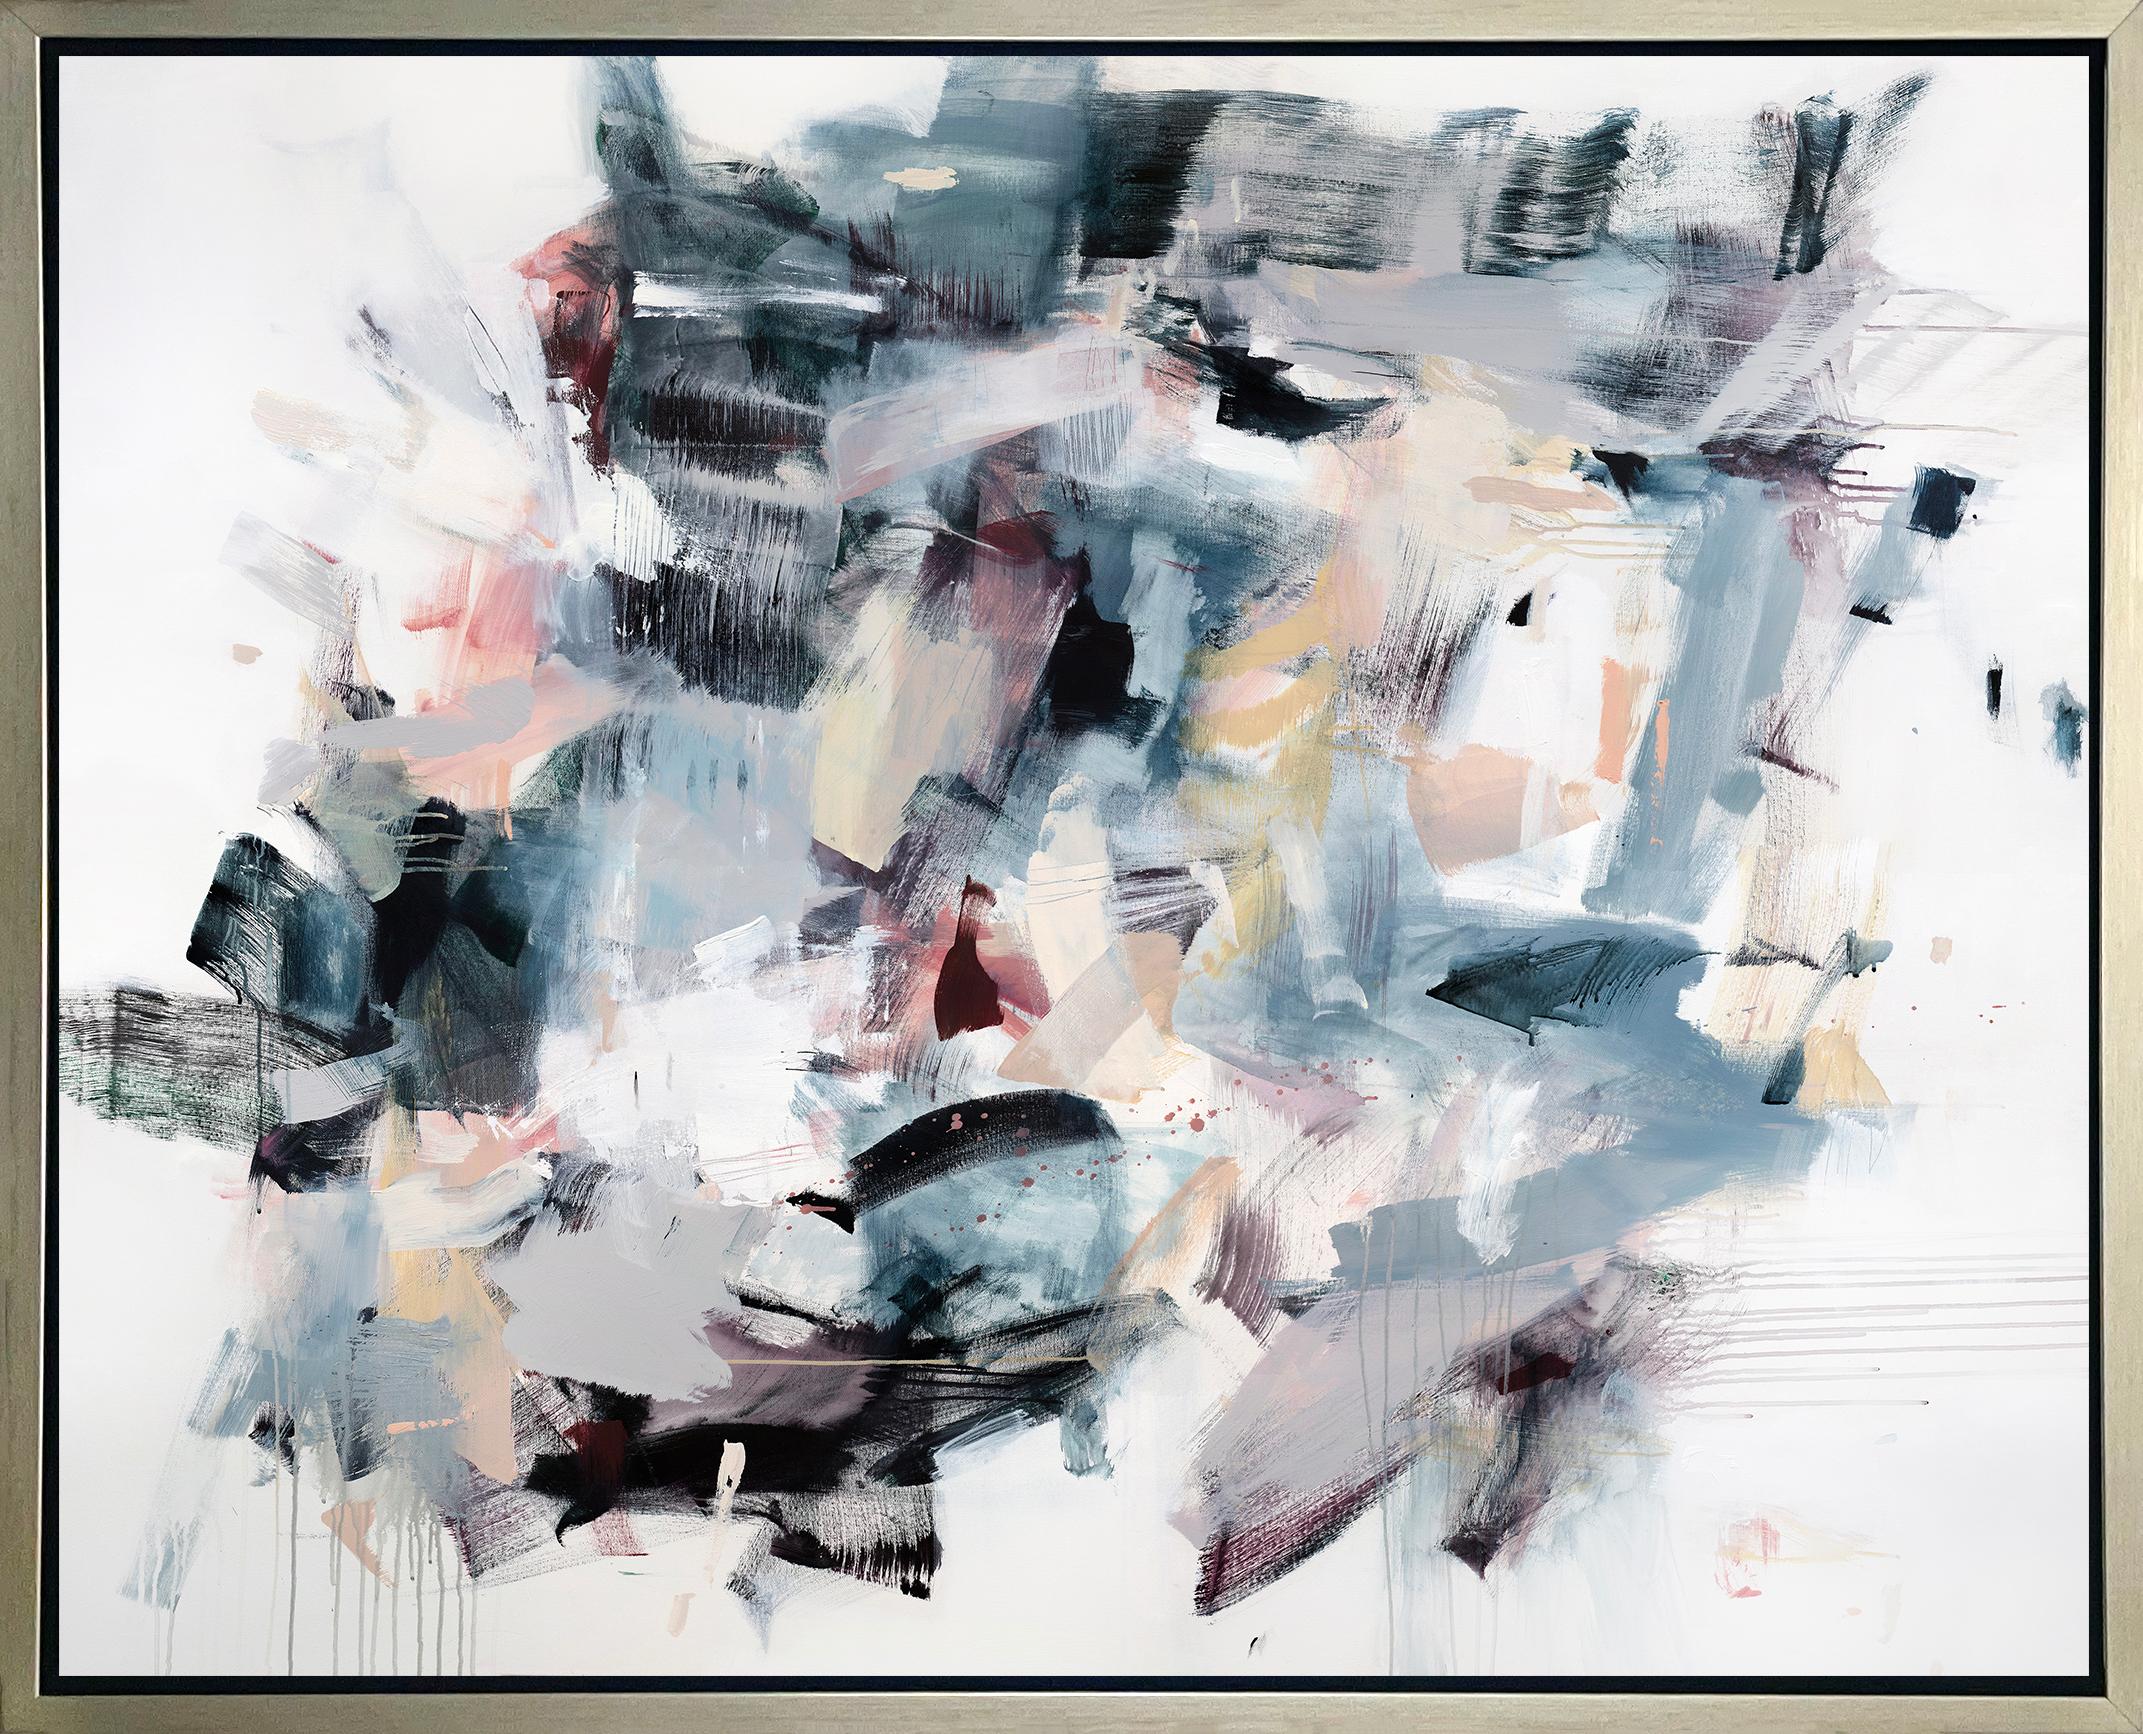 Kelly Rossetti Abstract Print - "Serotonin Overflow, " Framed Limited Edition Giclee Print, 48" x 60"